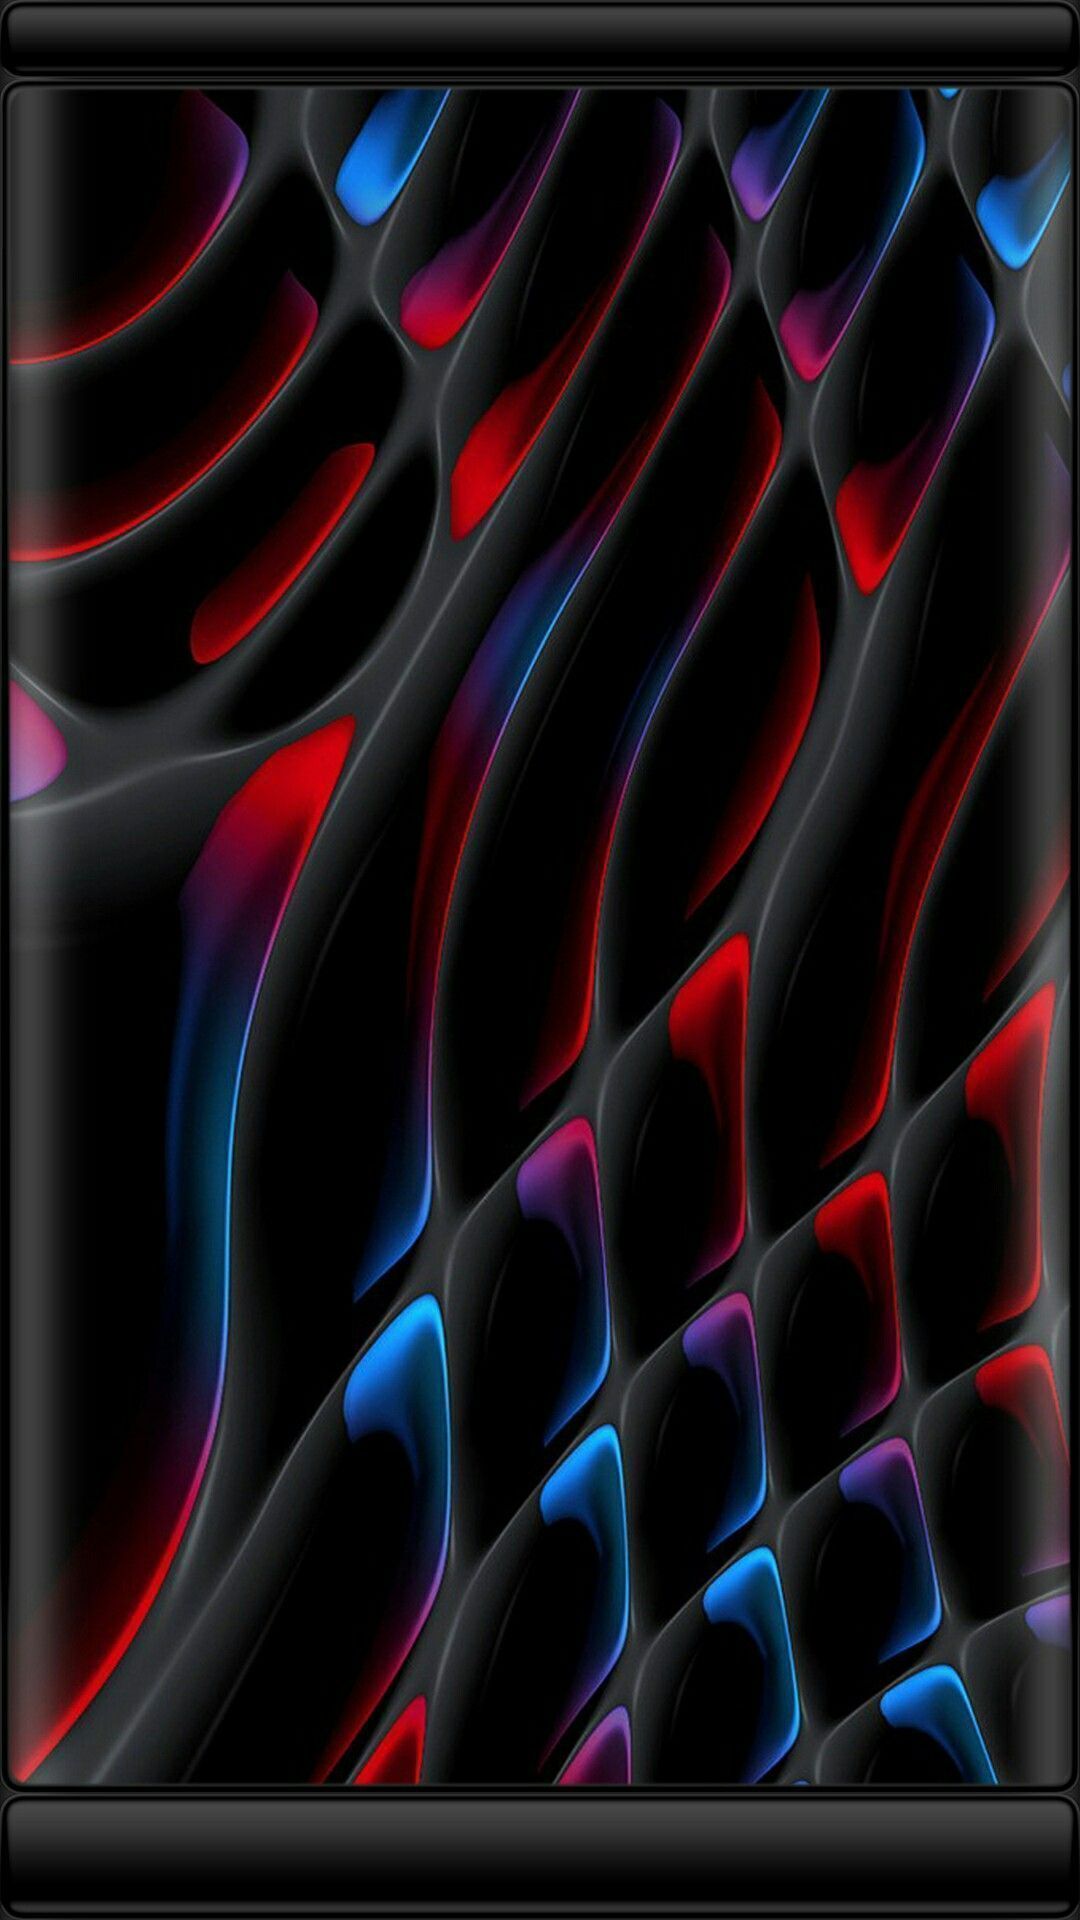 iPhone Apple iPhone Black HD Wallpaper 1080p For Mobile